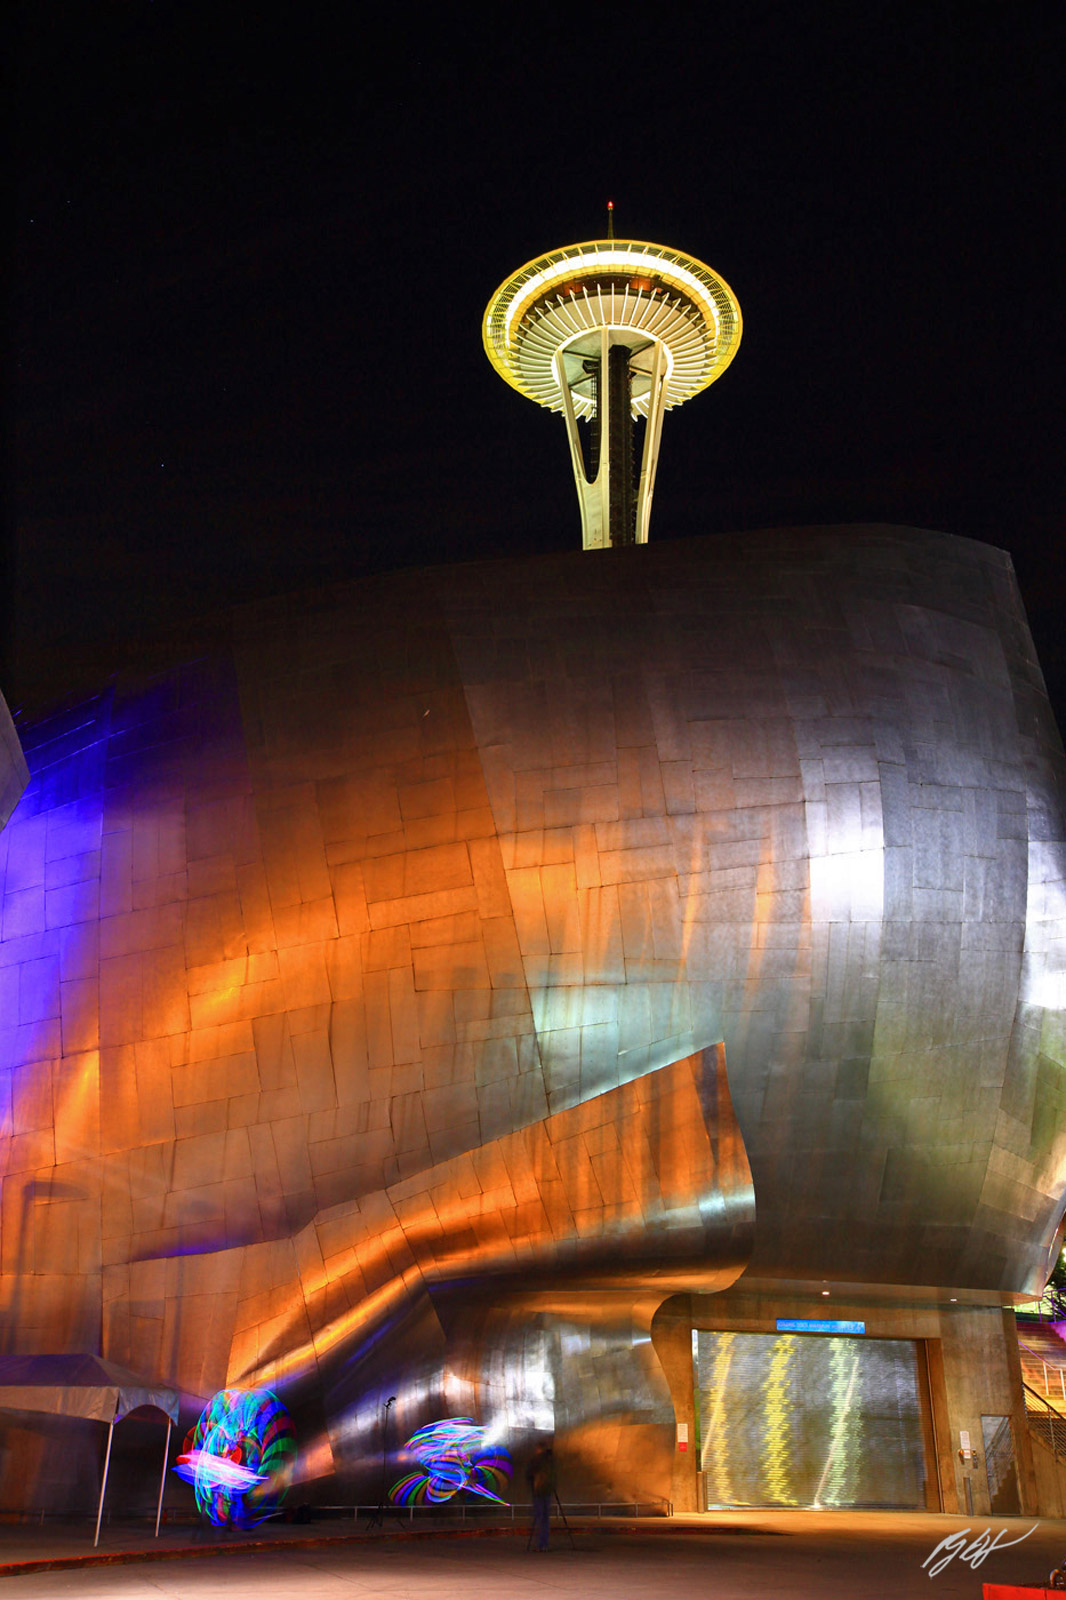 The Space Needle and the Experience Music Project in Seattle Center in Seattle Washington